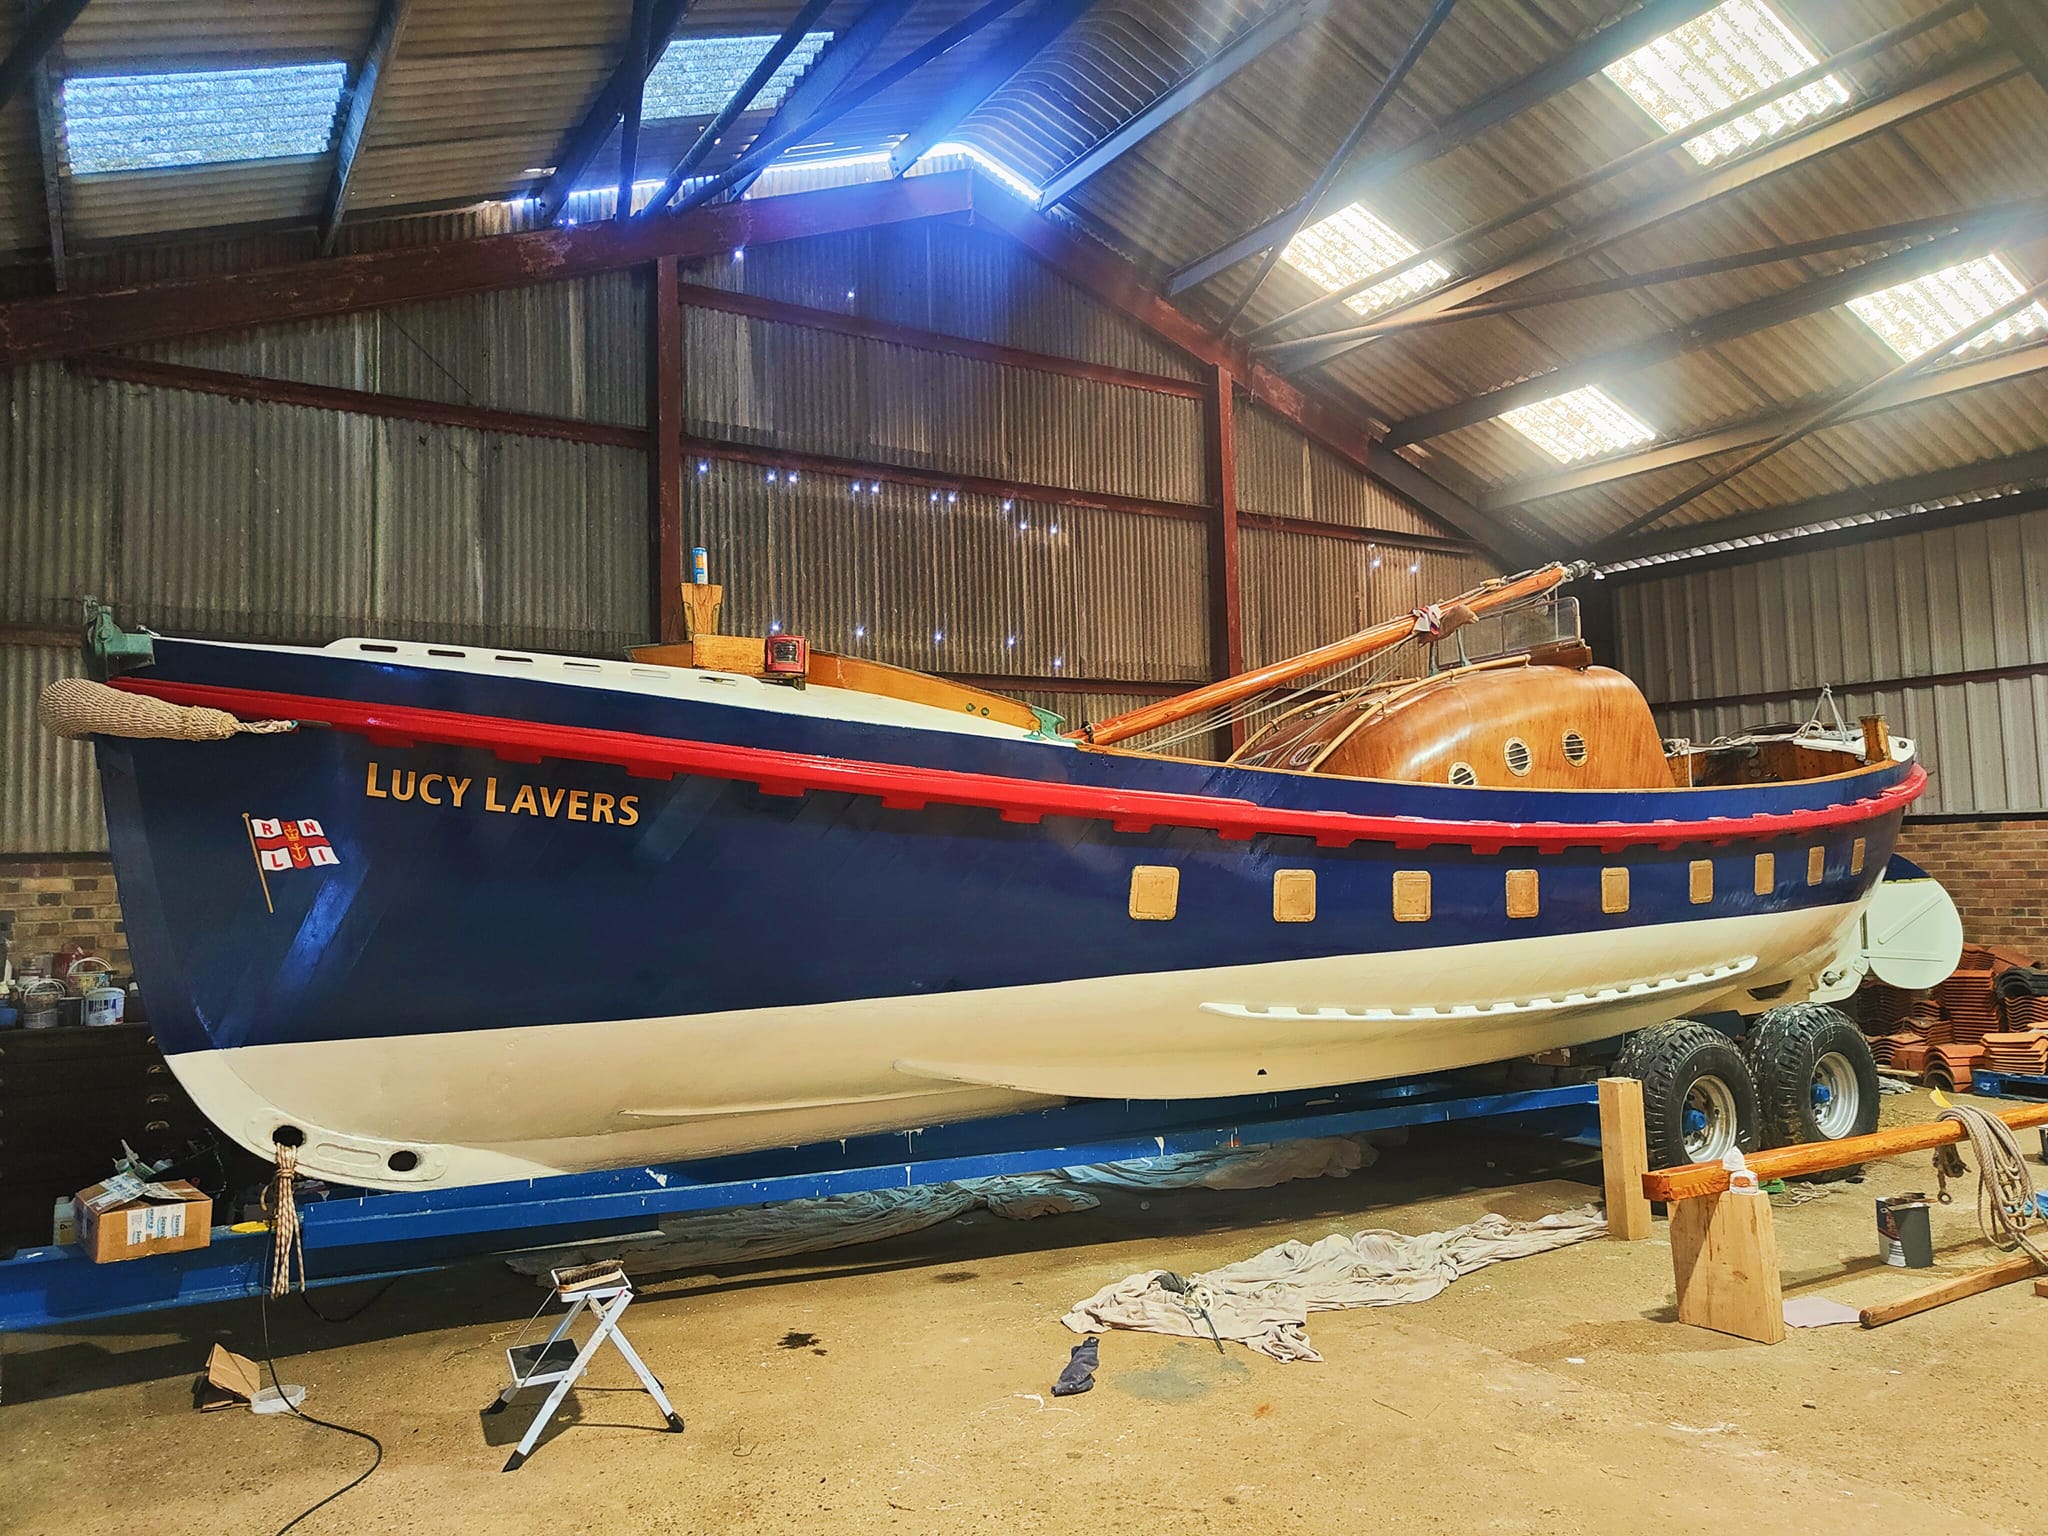 Lucy Lavers Boat after being painted